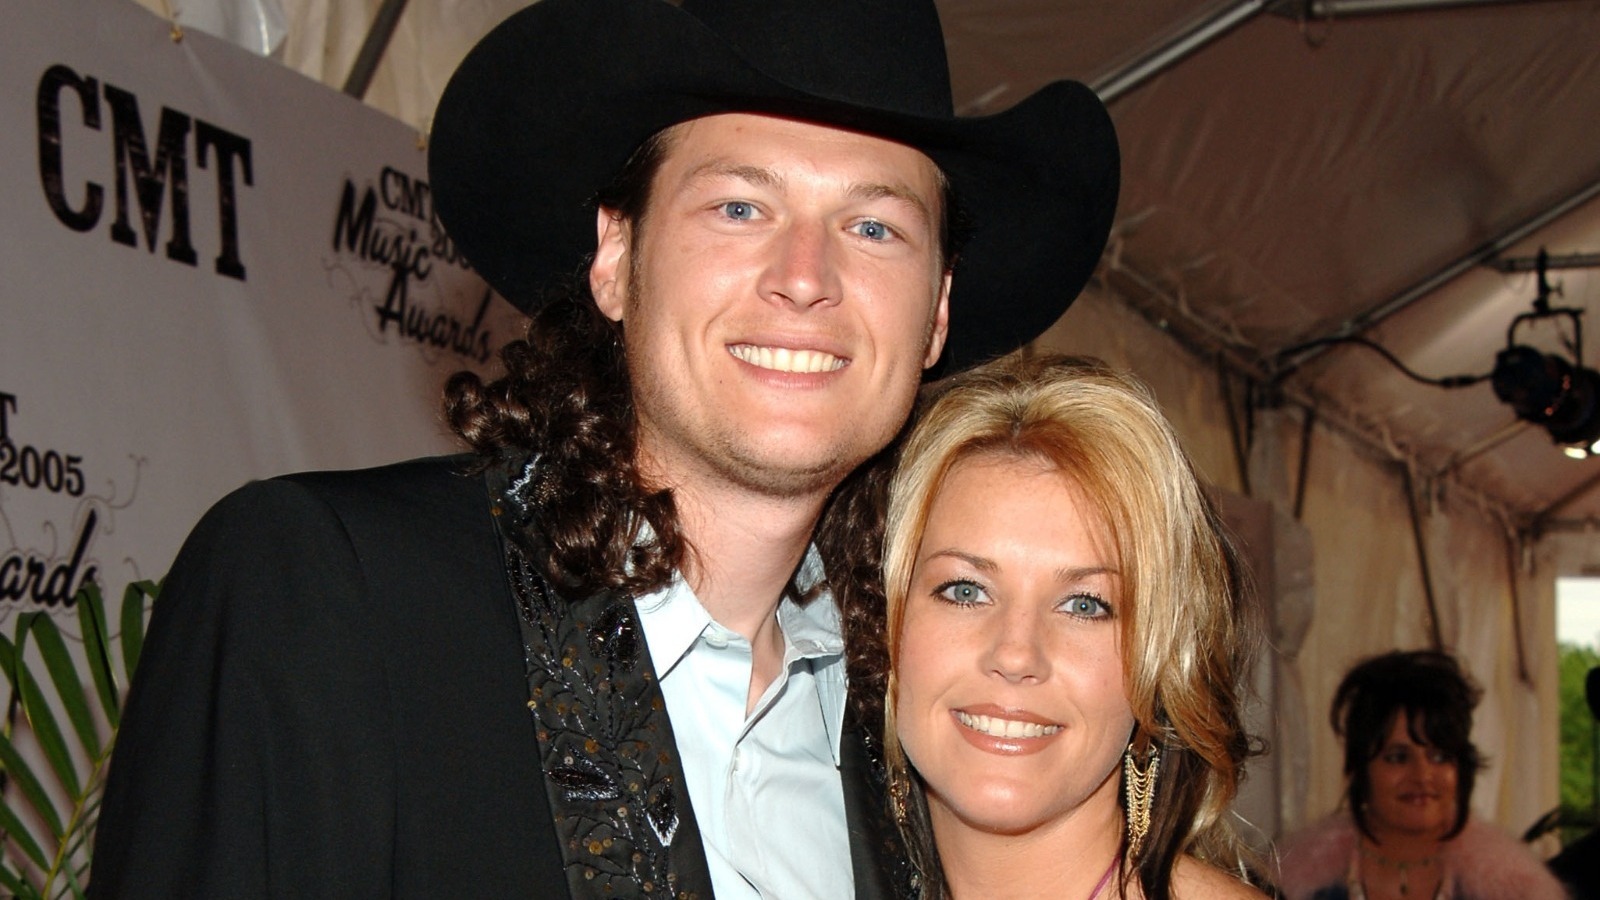 The Truth About Blake Shelton's First ExWife